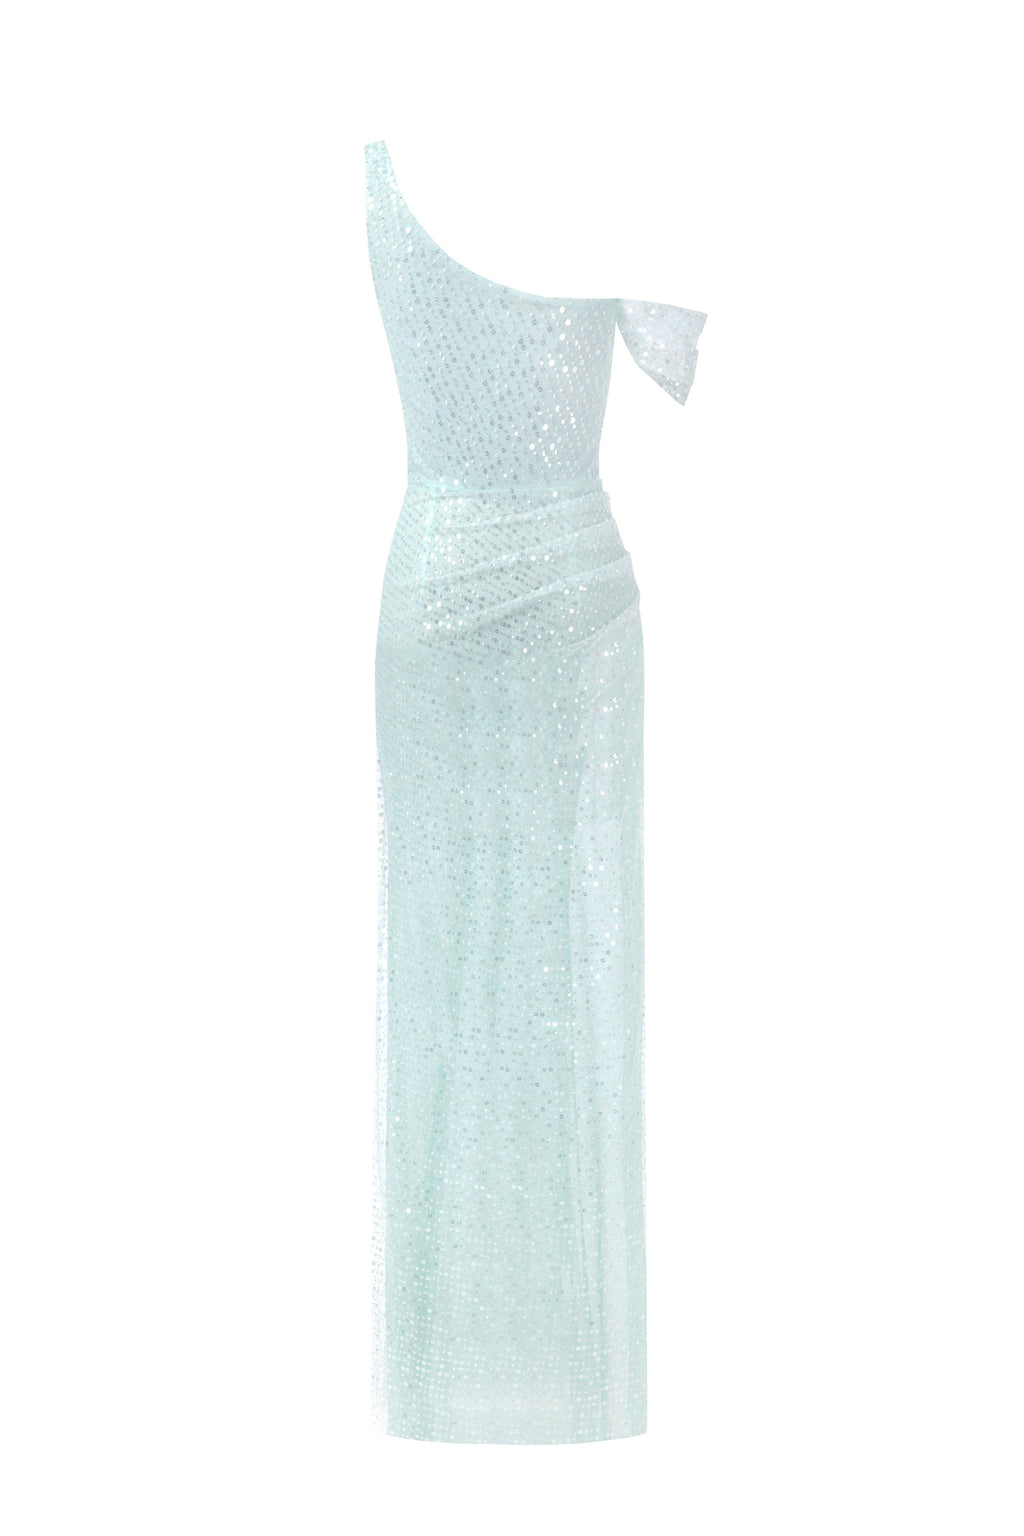 Striking sequined maxi dress in mint green